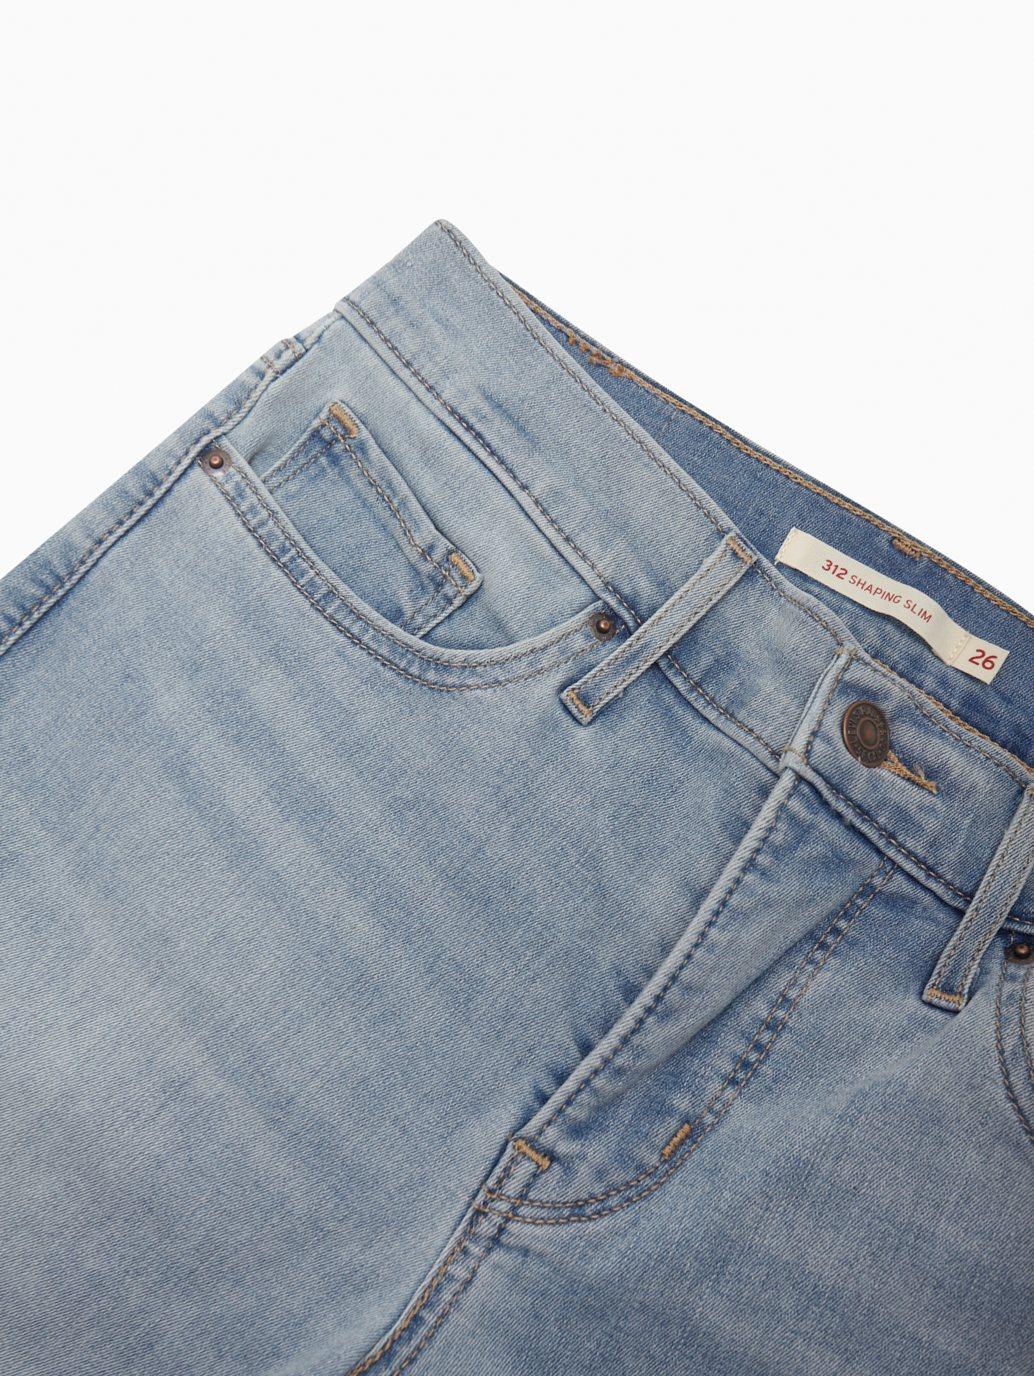 levis malaysia womens 312 shaping slim jeans 196270195 16 Details